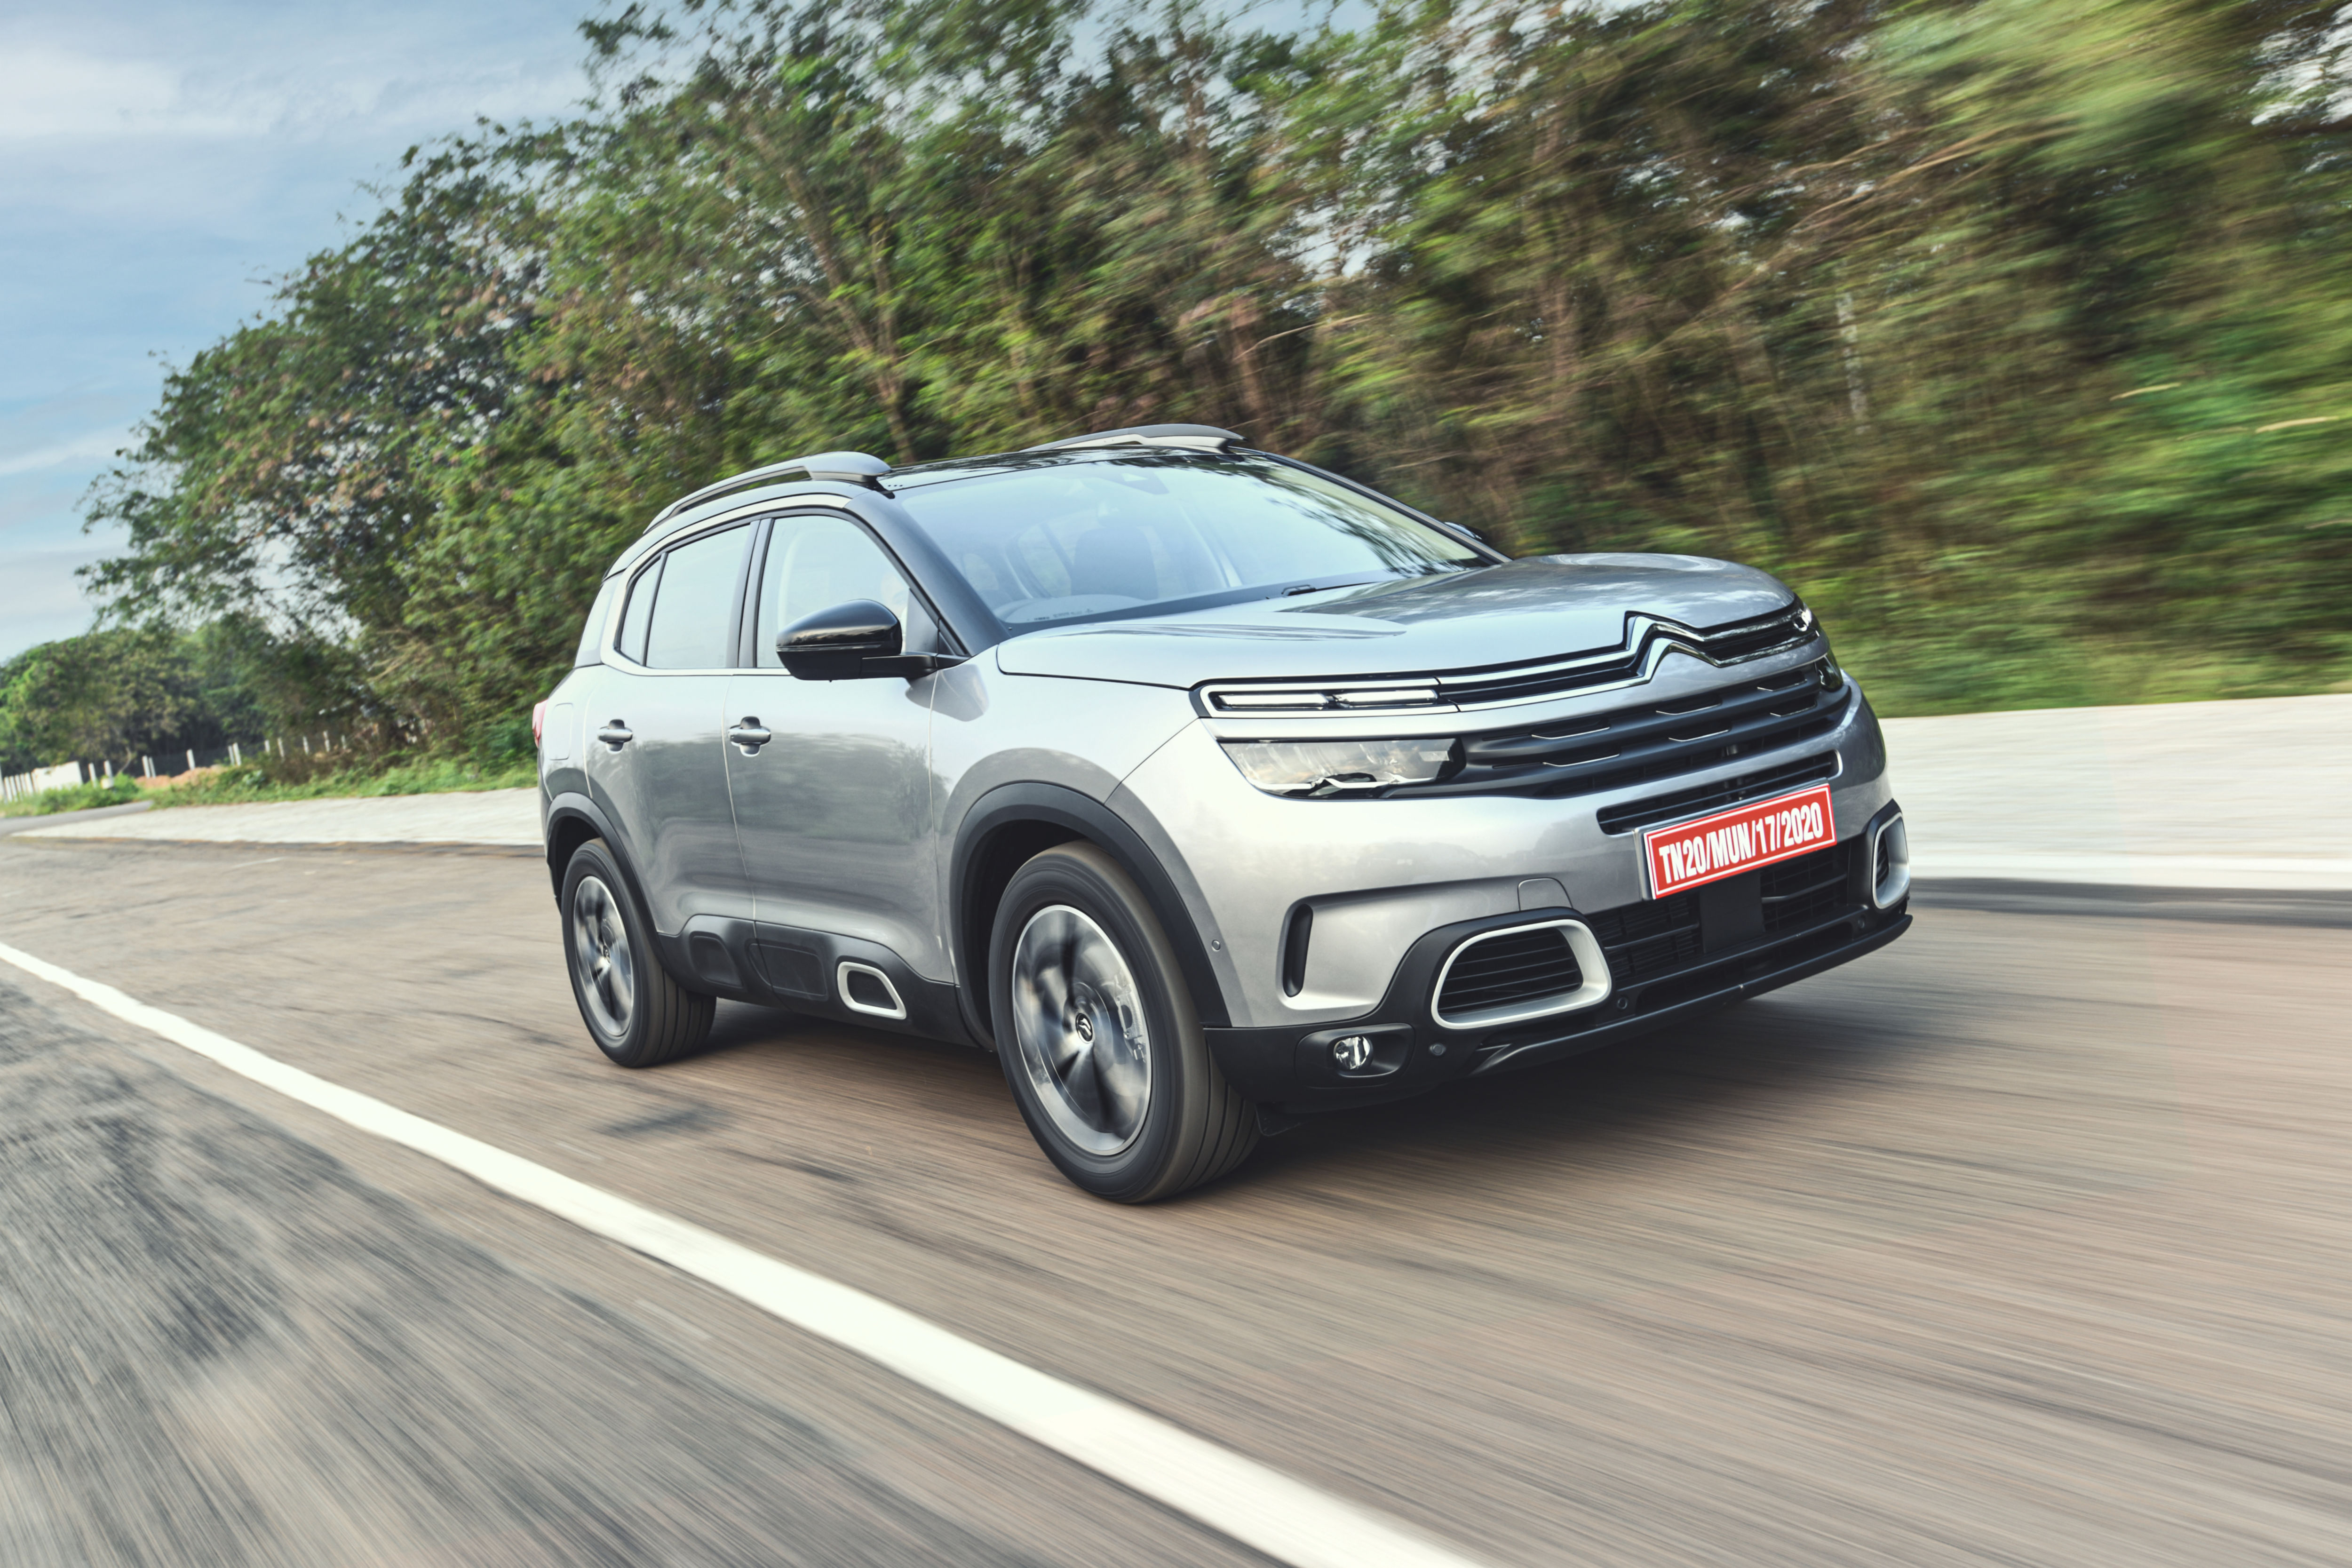 Citroen C5 Aircross gets a move on with a sense of purpose on open stretches. Want more power? There is a Sports mode that can activated at the touch of a button.